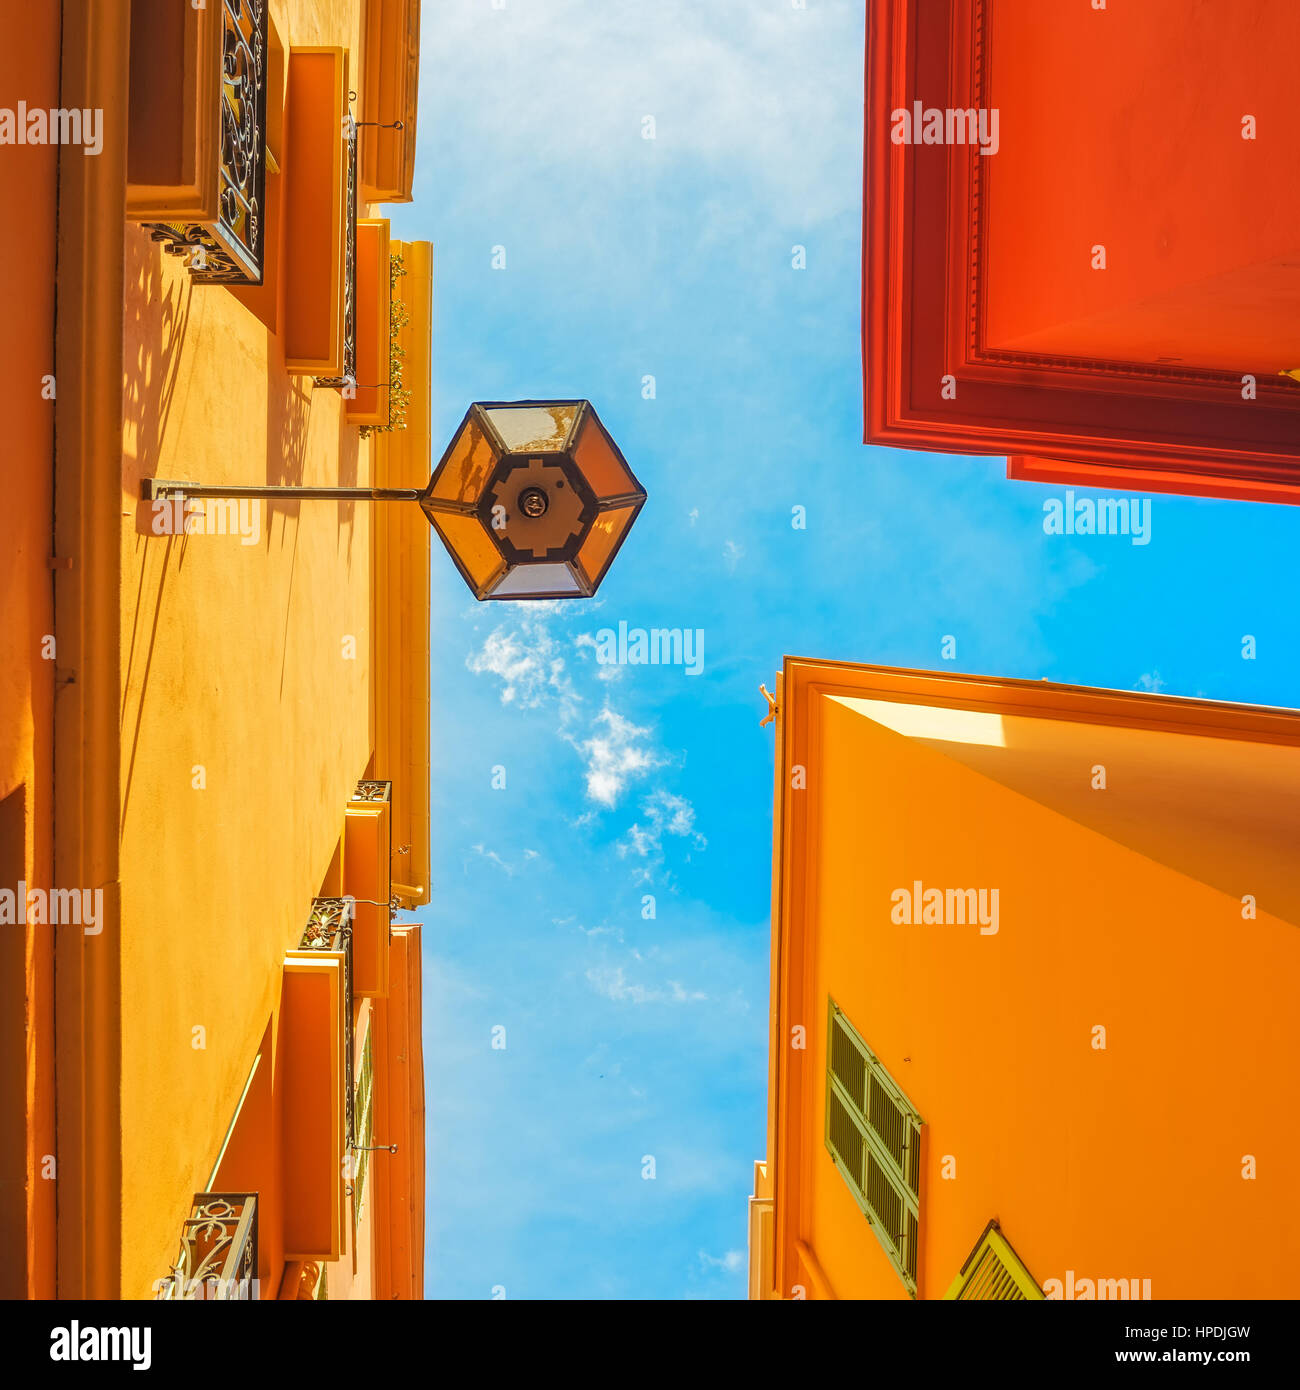 Urban abstract. Street lamp, red yellow orange house facades and blue sky background. Bottom view Stock Photo